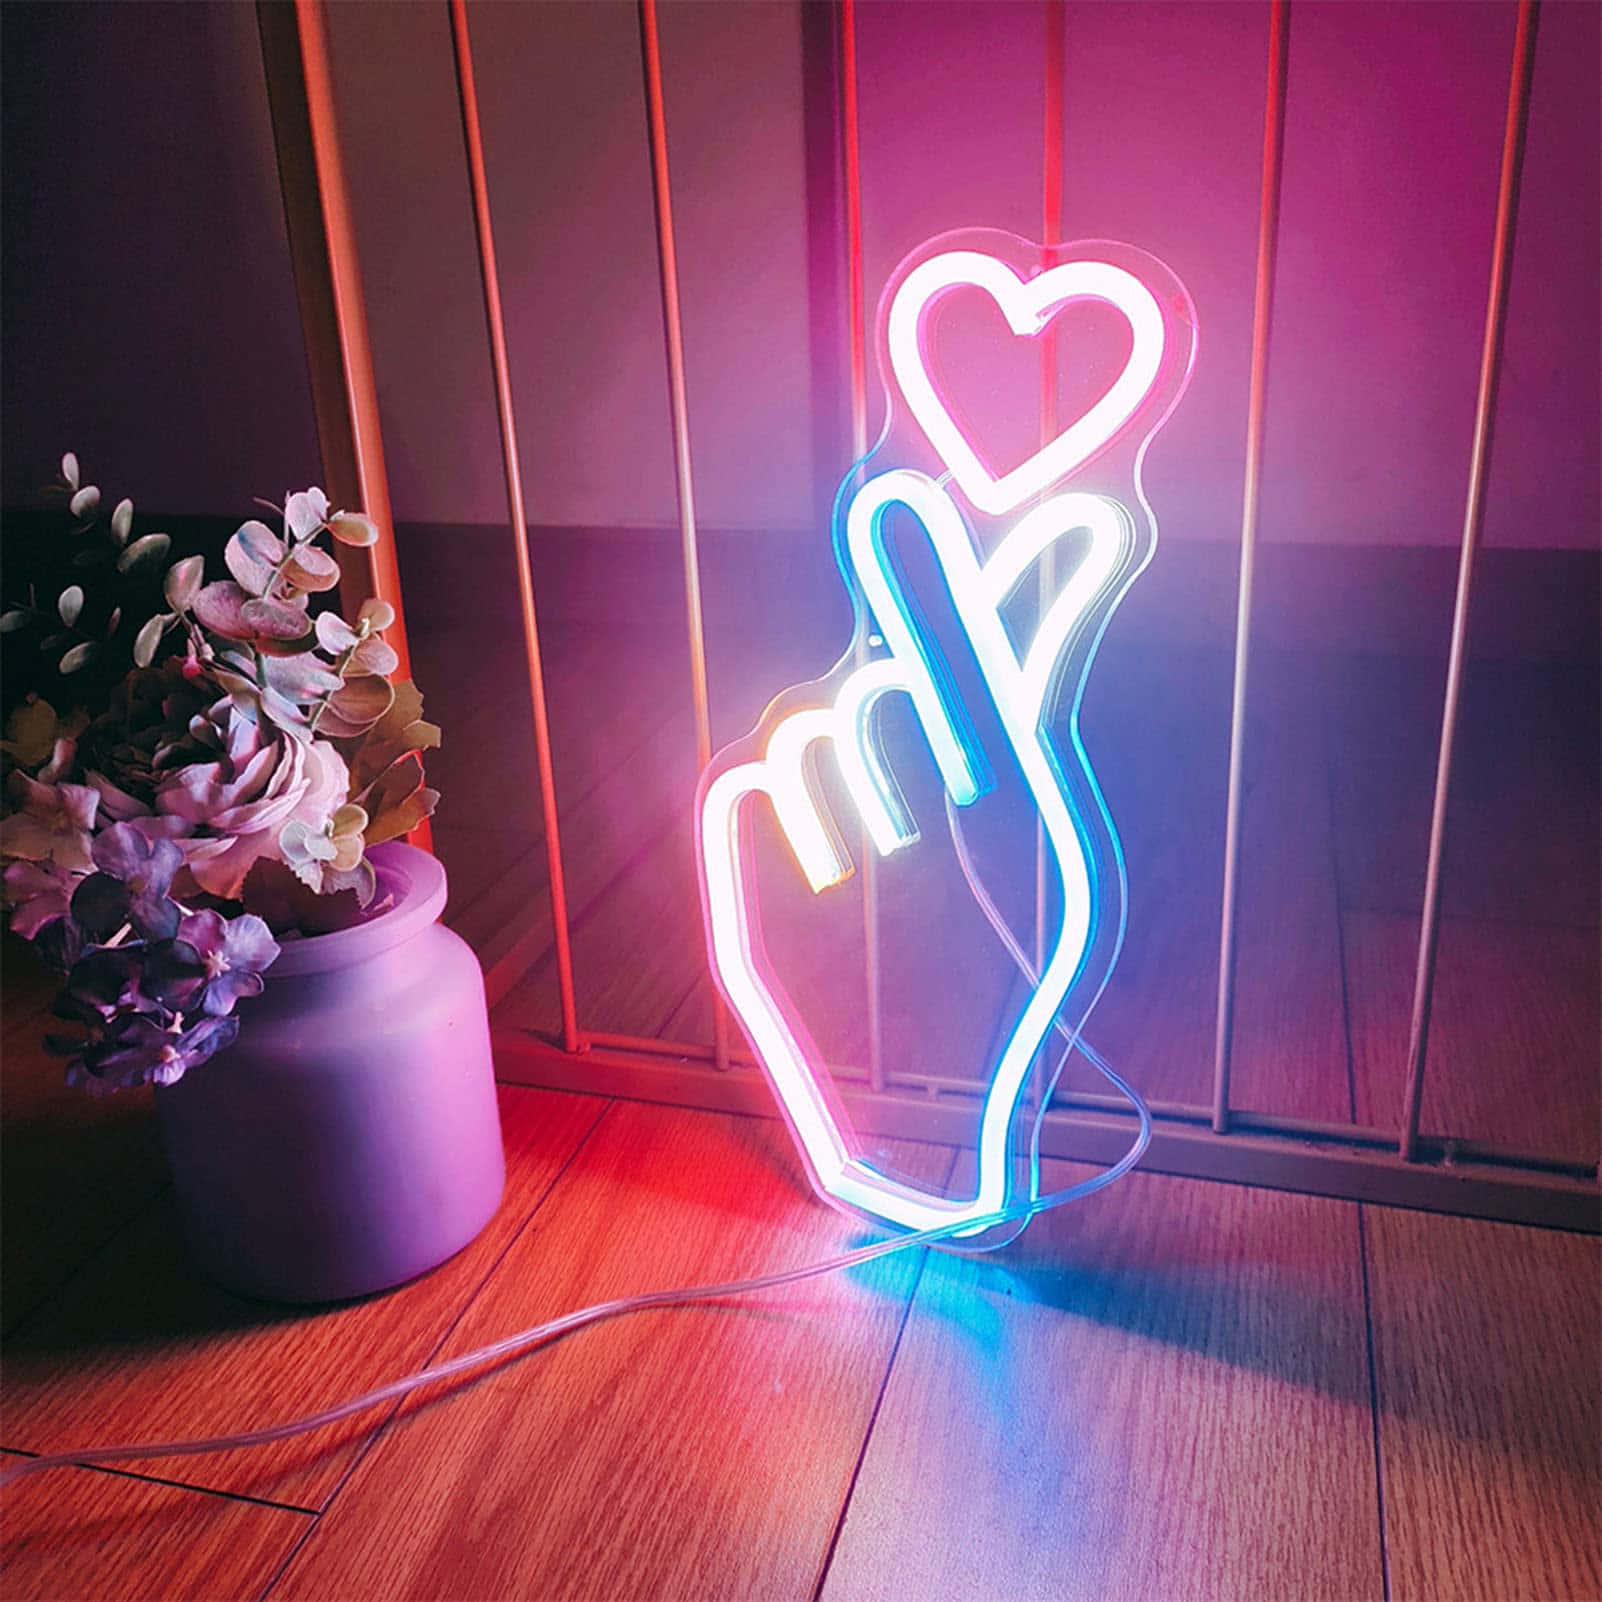 Aesthetic Grunge Pink And Blue Neon Love Oppa Signs Wallpaper